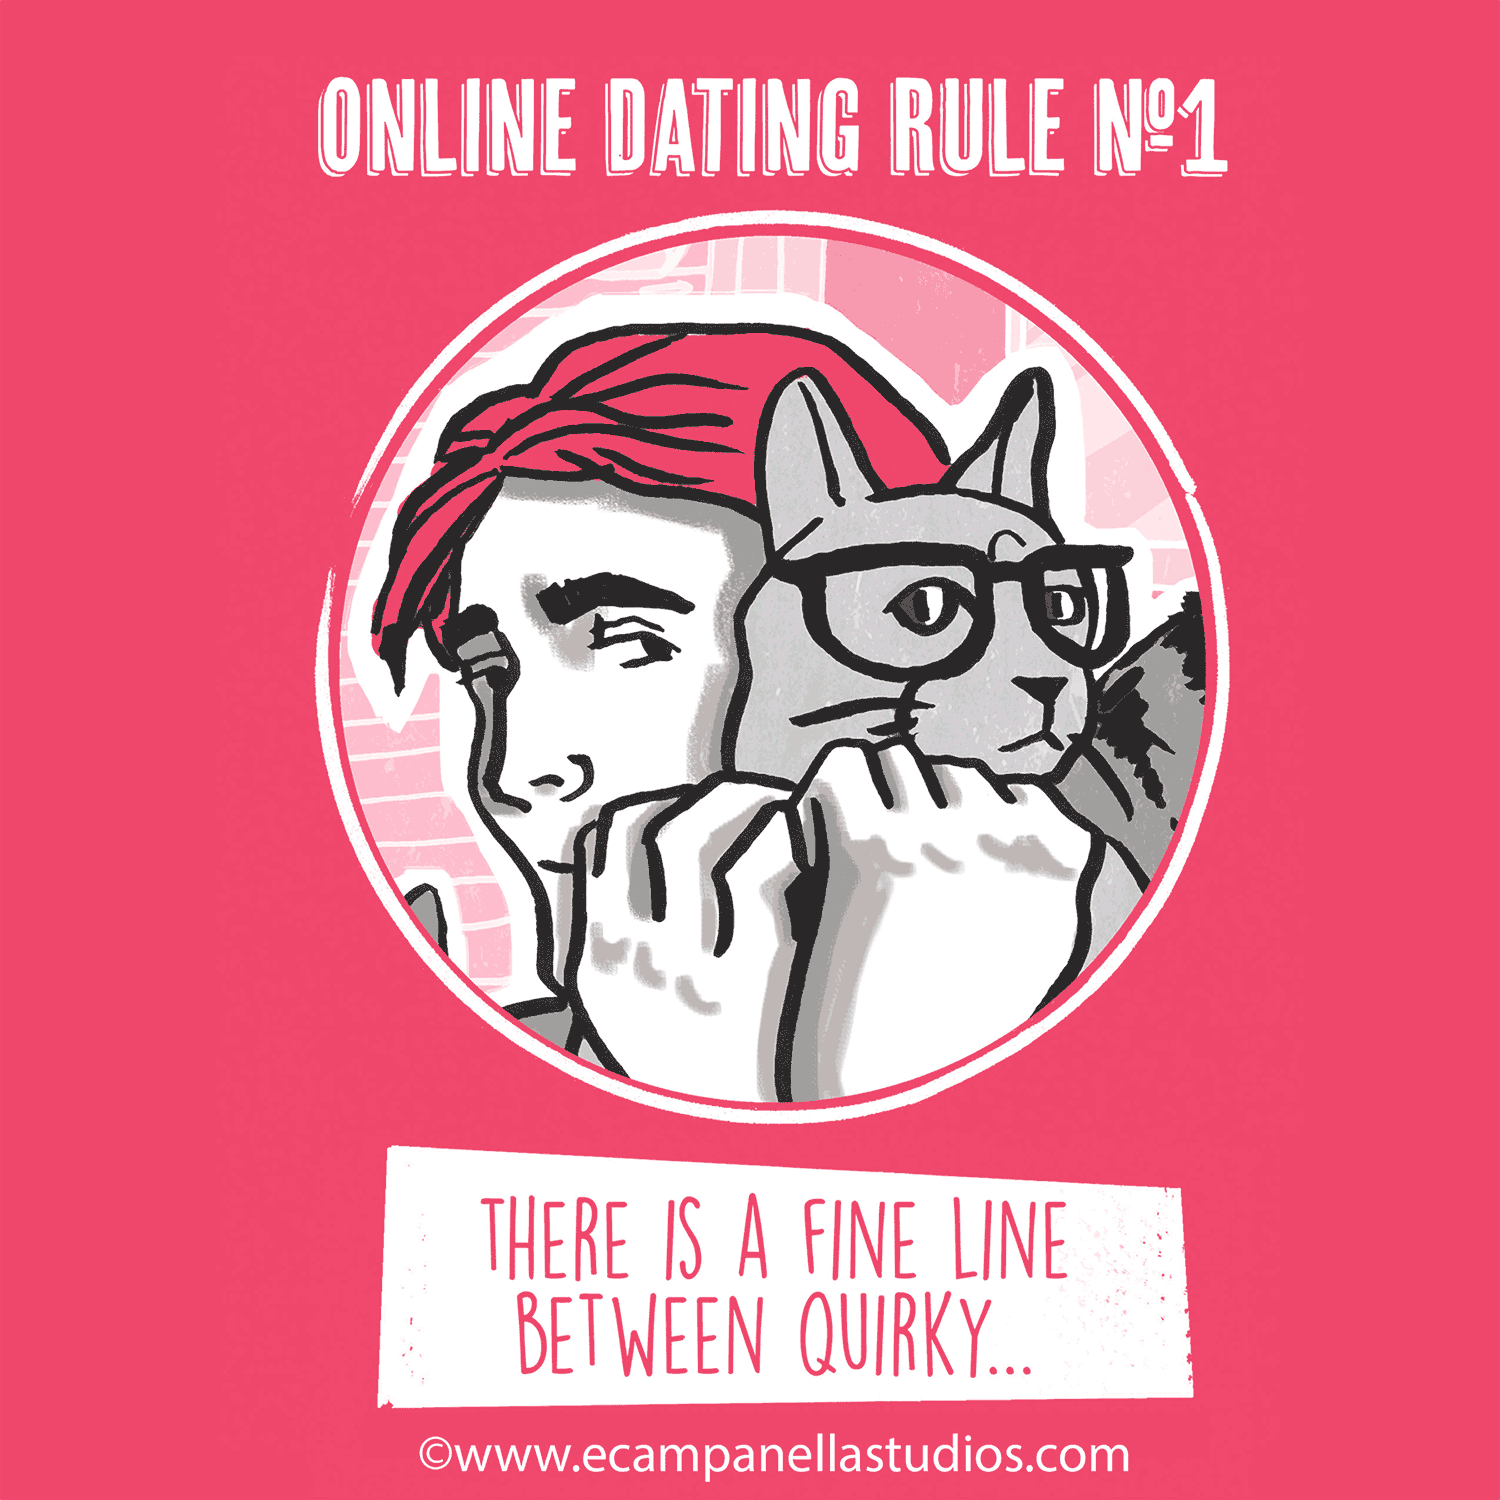 Artist Illustrates Galentine Gifs "Drawn" From Her Real-Life Online Dating Experiences.